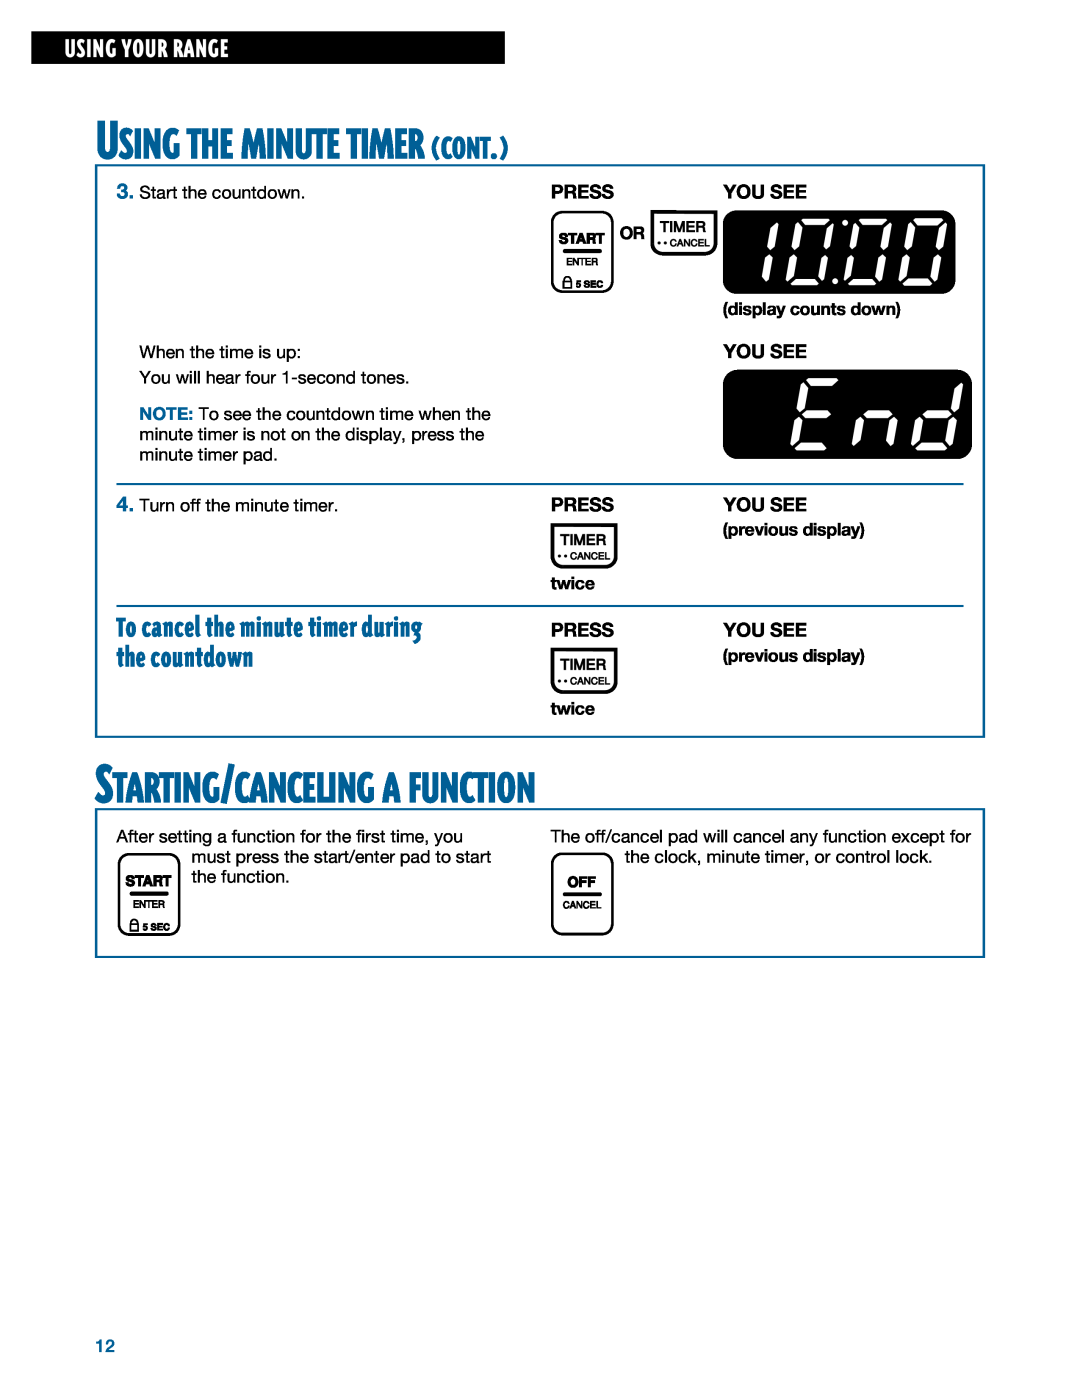 Whirlpool TGS325E manual Using The Minute Timer Cont, Starting/Canceling A Function, Using Your Range, You See, Press 